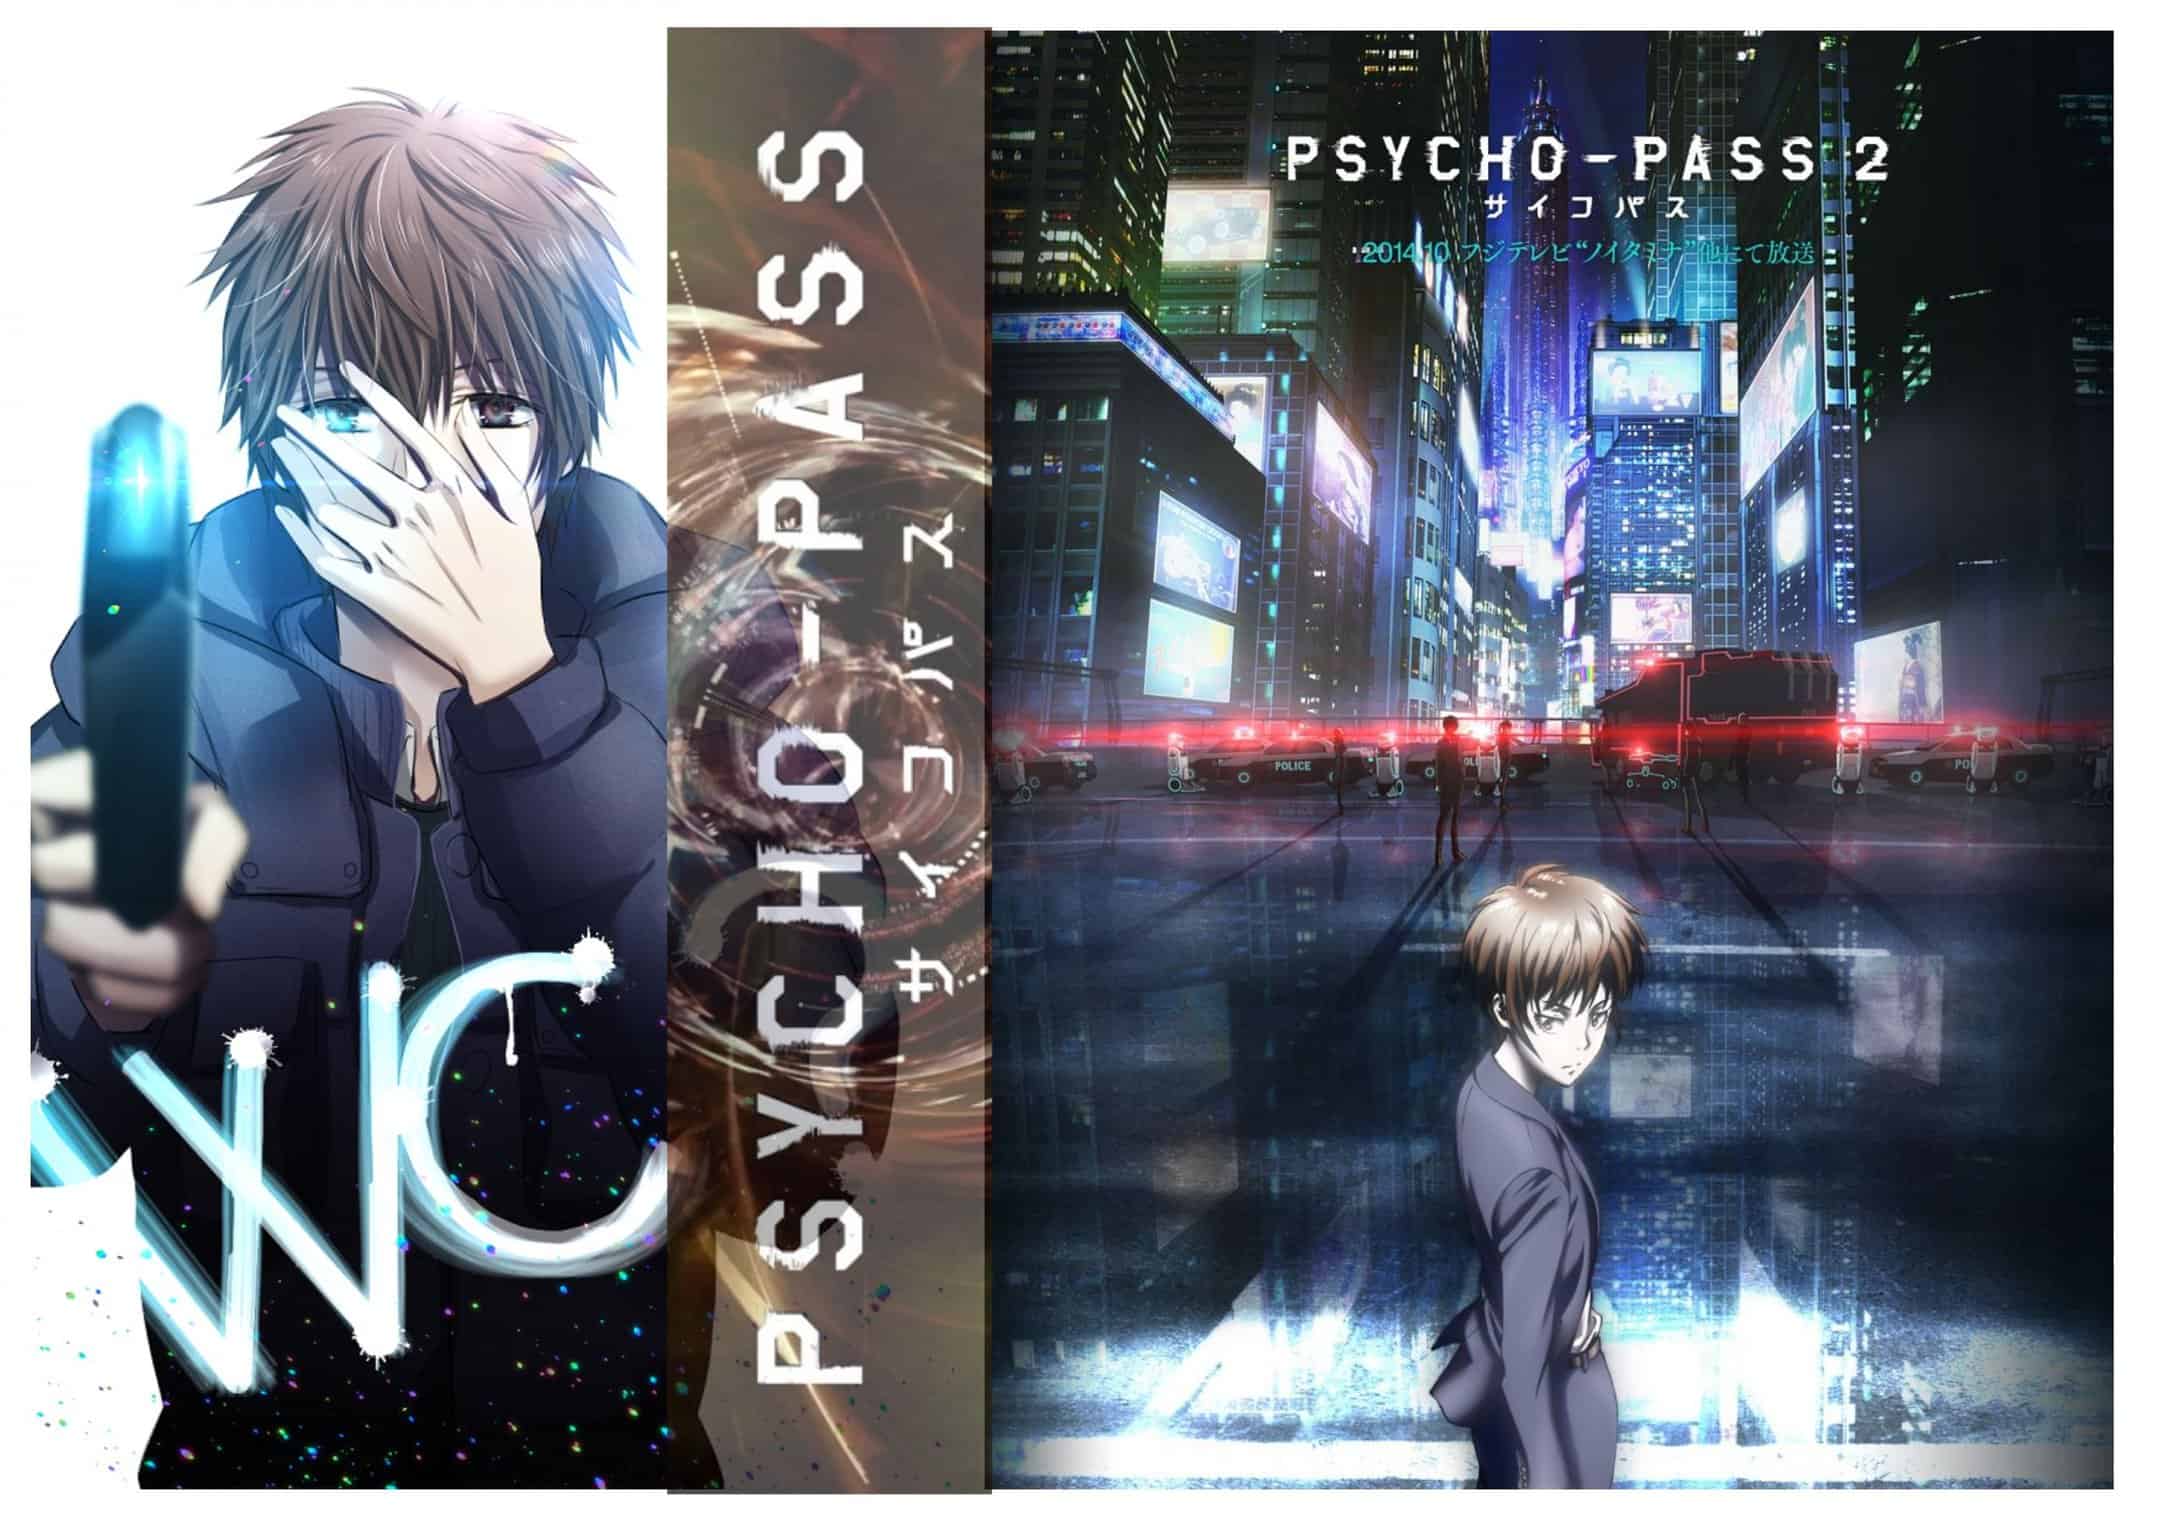 Psycho-Pass 2 analysis: The Paradox of Omnipotence